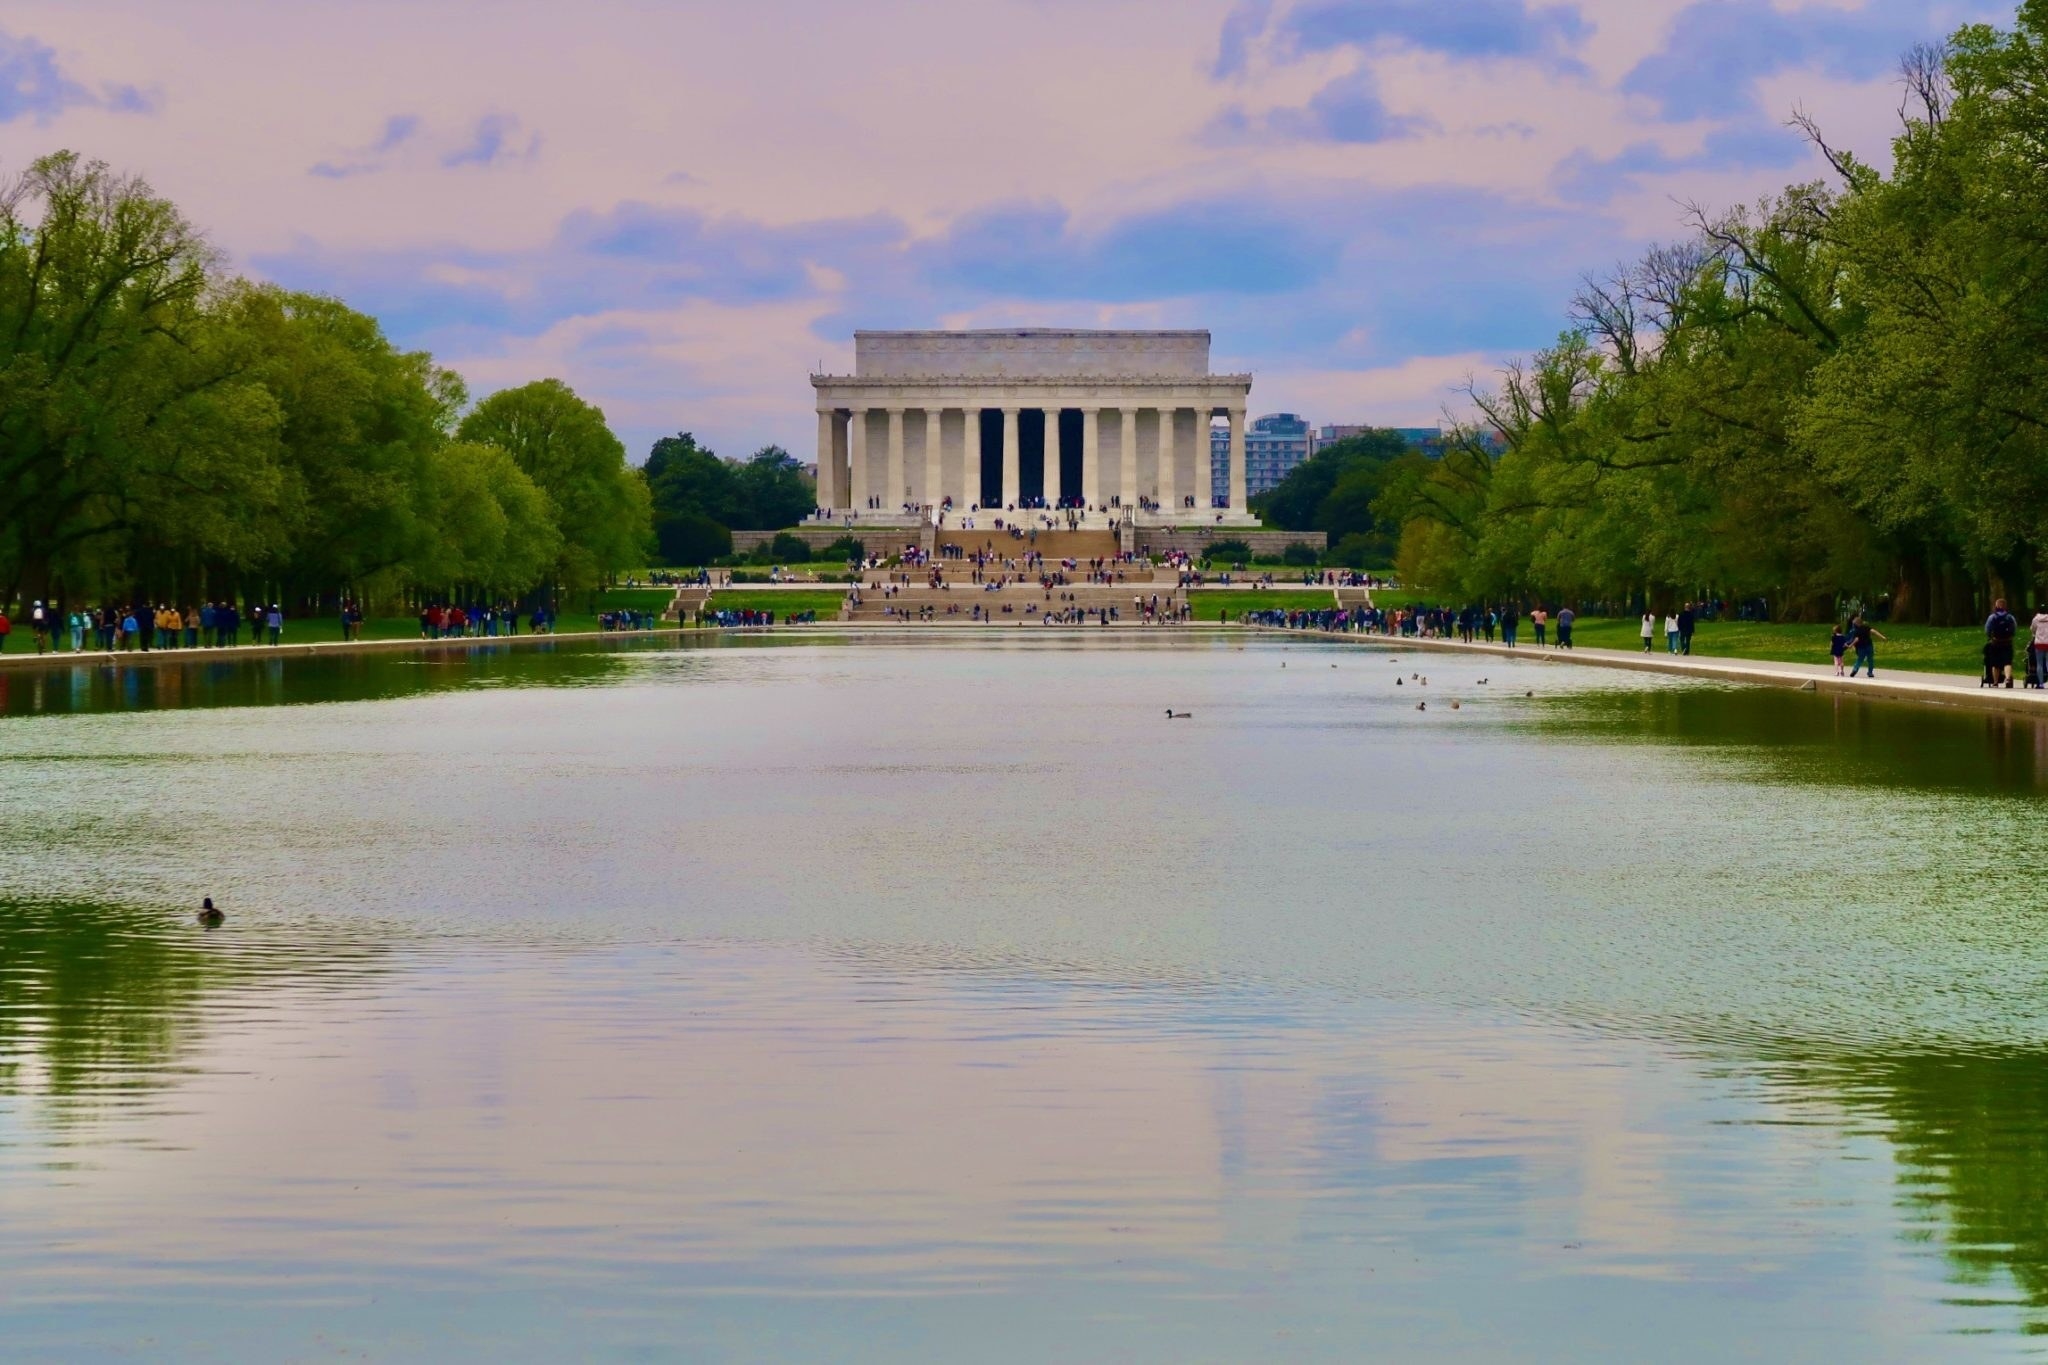 A view of the Lincoln Memorial across the Reflection Pool